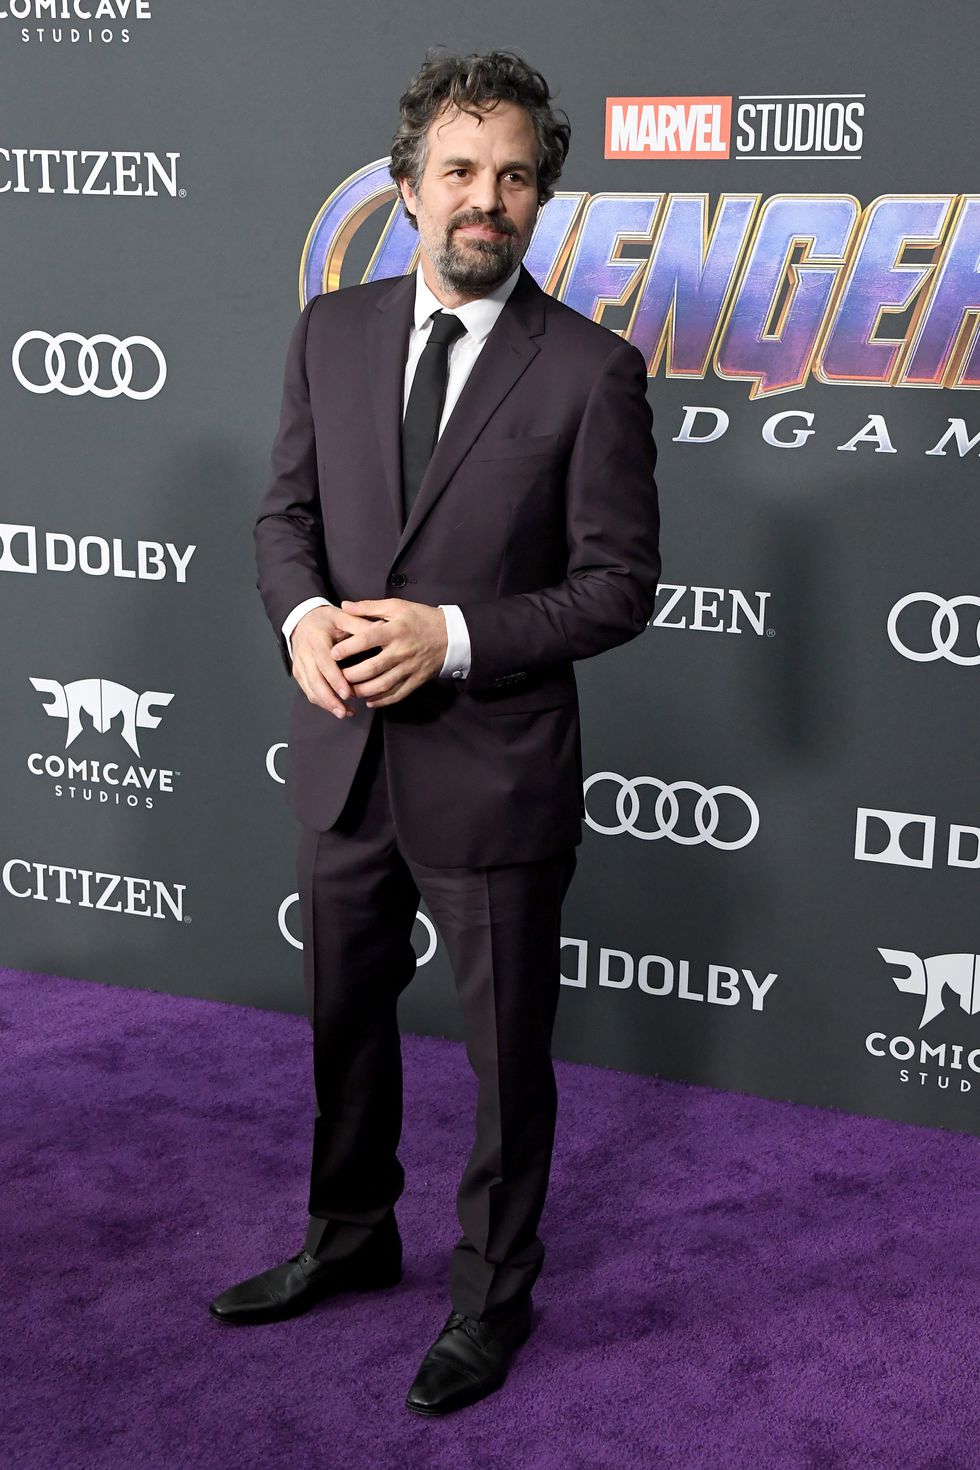 The cast of Avengers: Endgame looked amazing on the red carpet ...